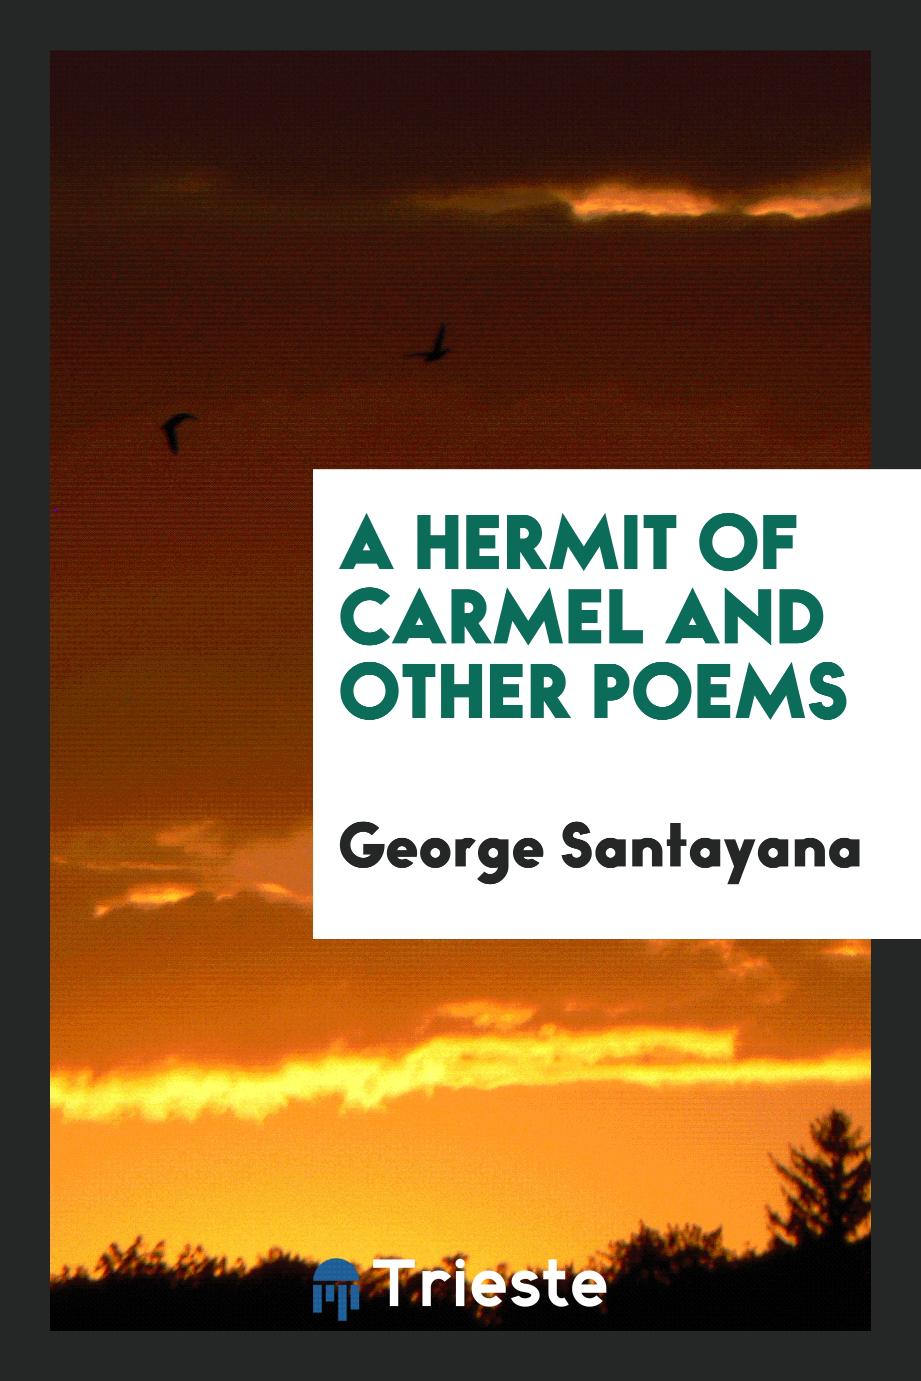 A hermit of Carmel and other poems